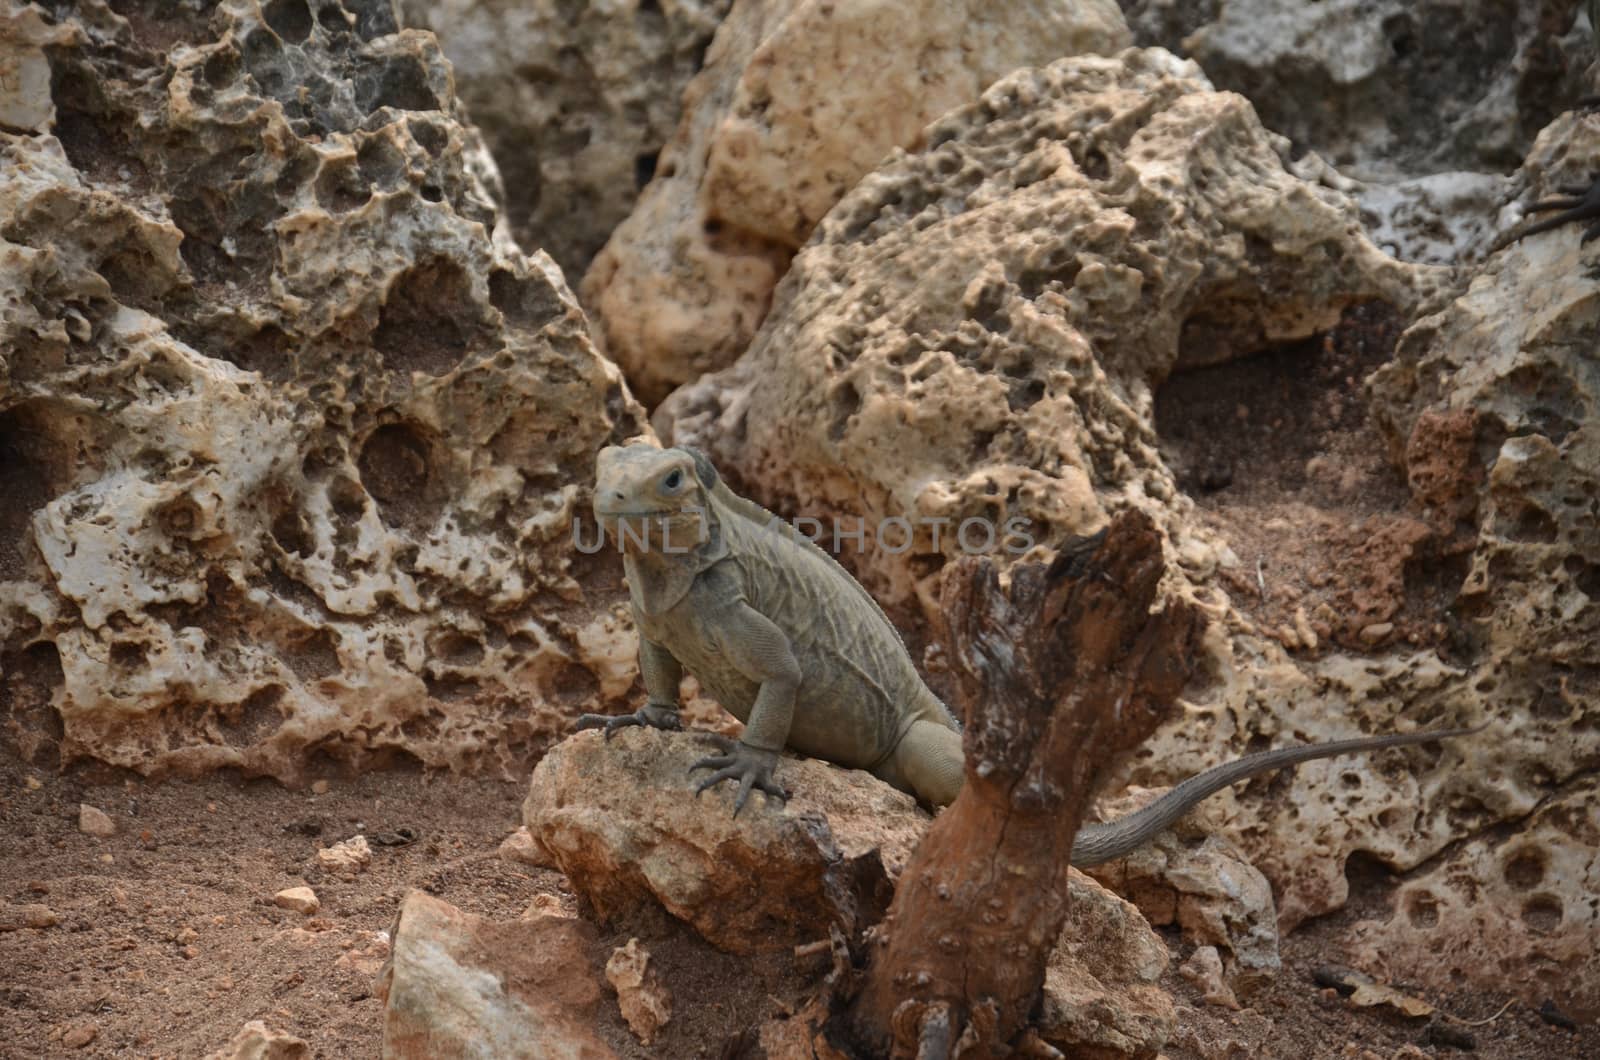 Brown iguanas sitting on the rocks. Fauna Of The Caribbean by claire_lucia